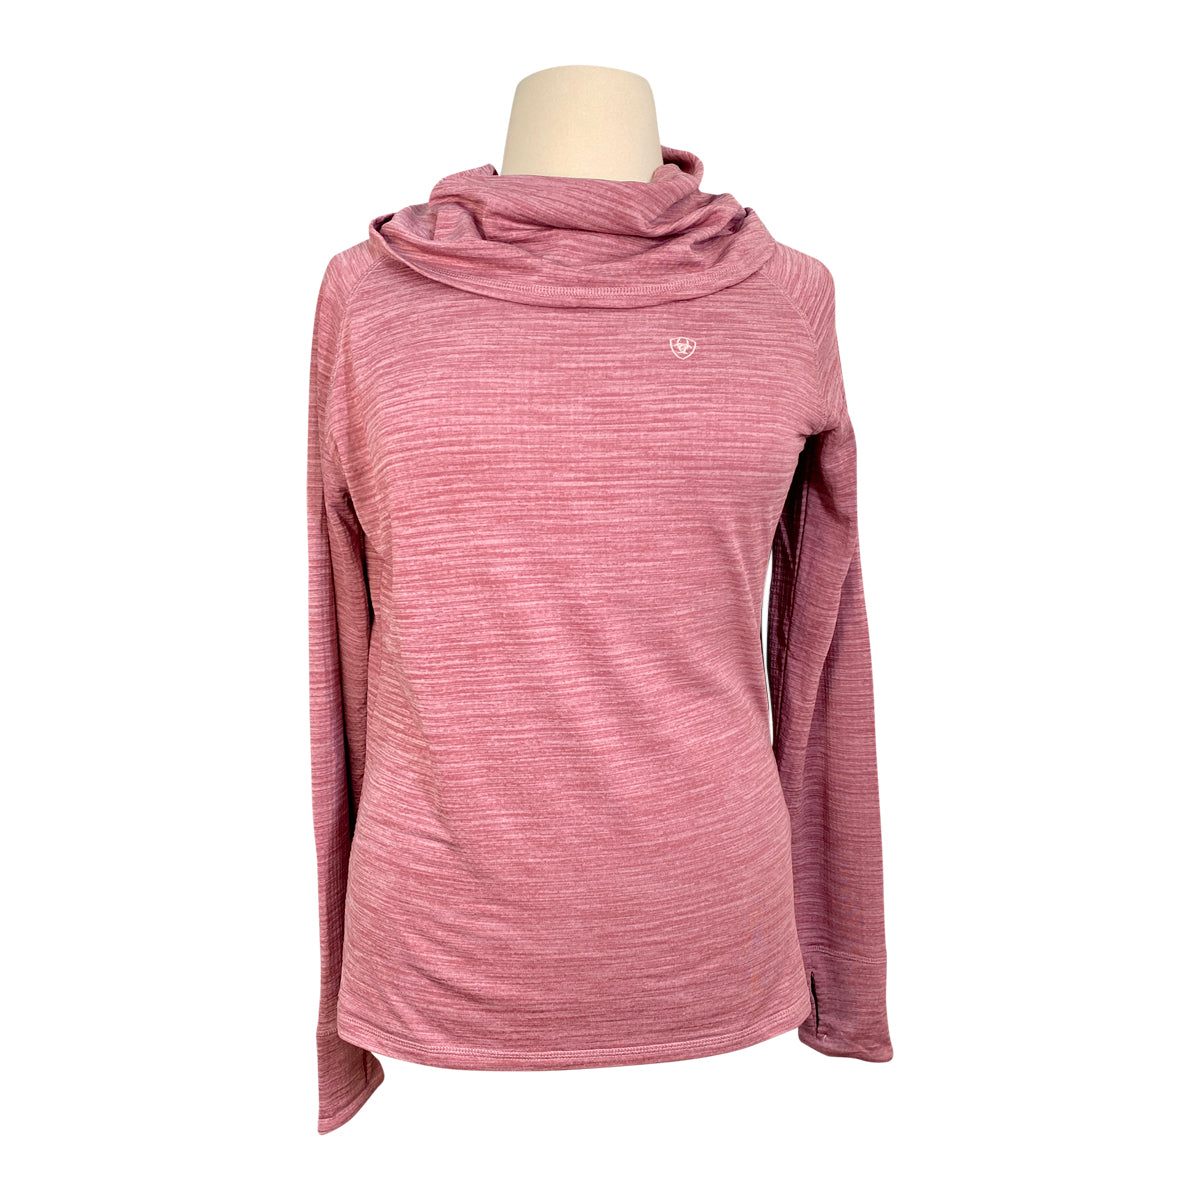 ork' Cowl Neck Baselayer in Dusty Rose